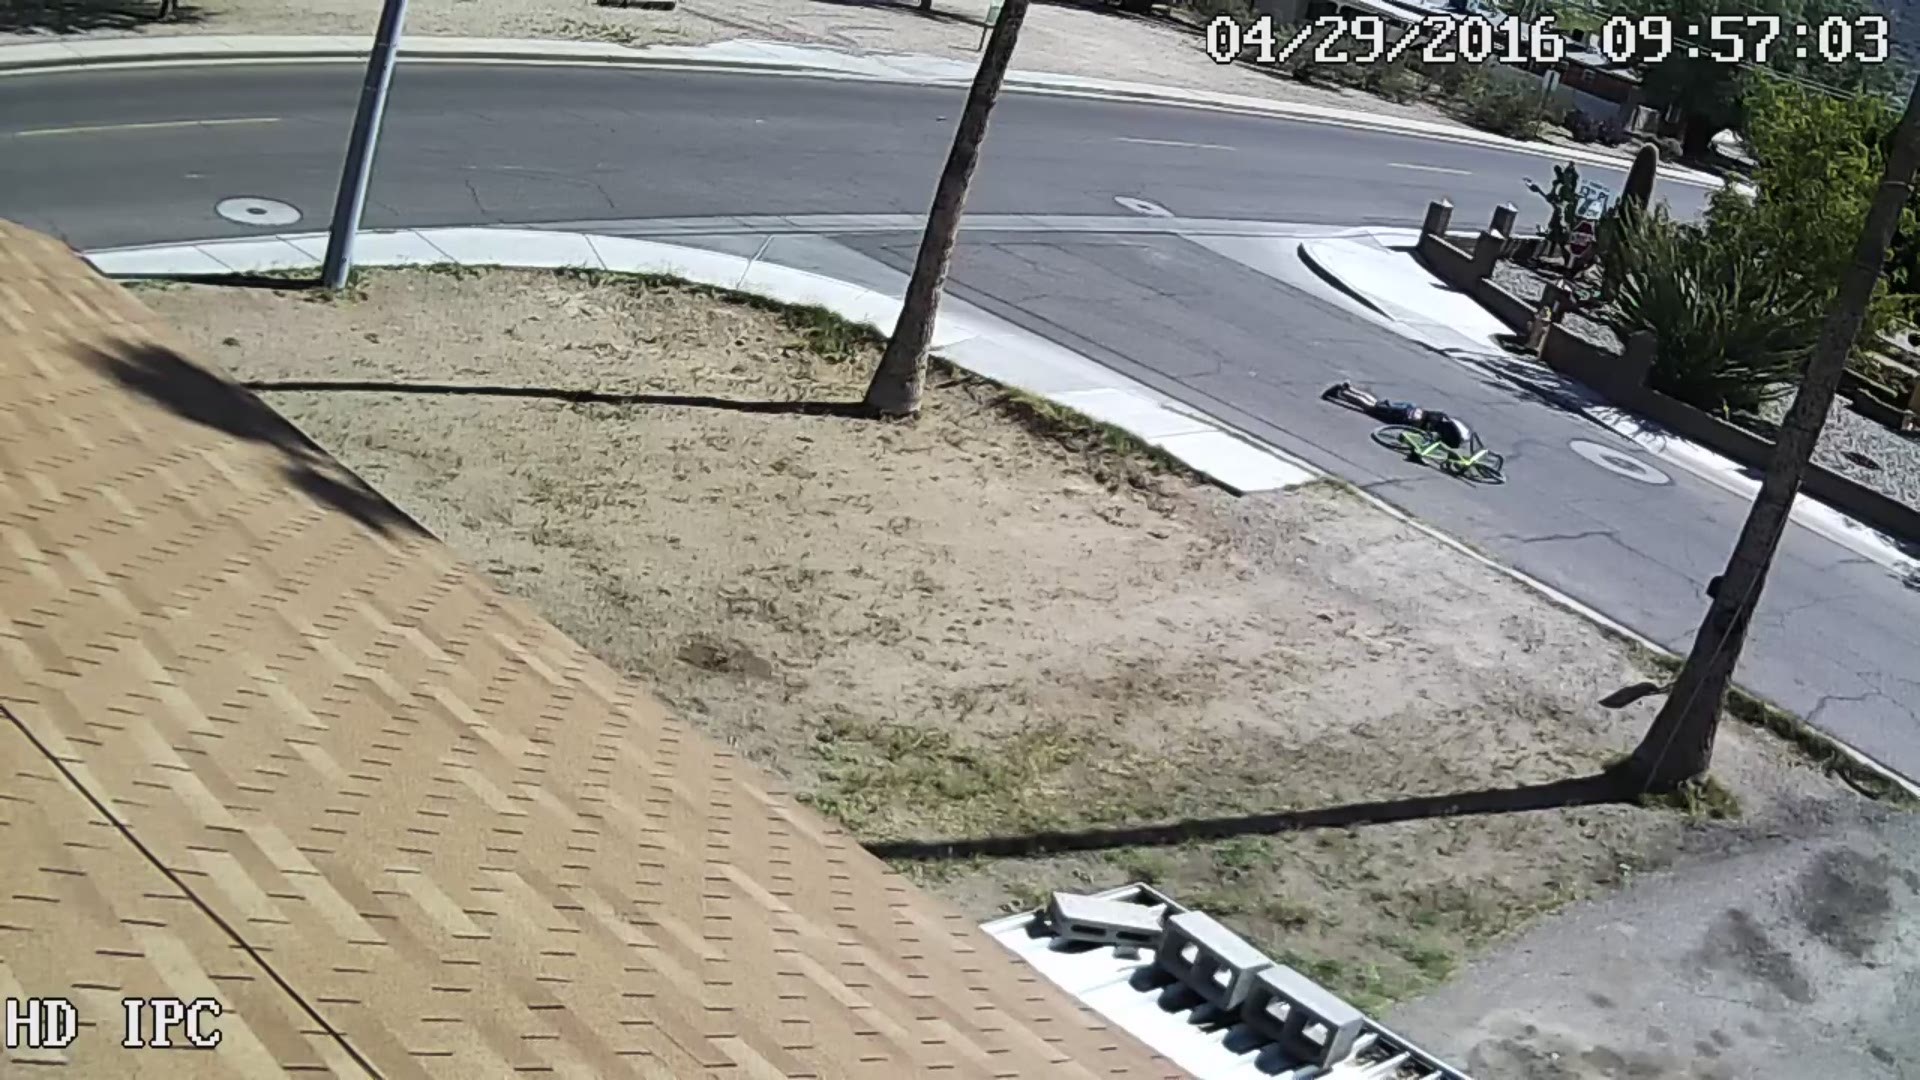 Security footage captured a car running over a man on a bike. Source: BlueHorse Solutions LLC